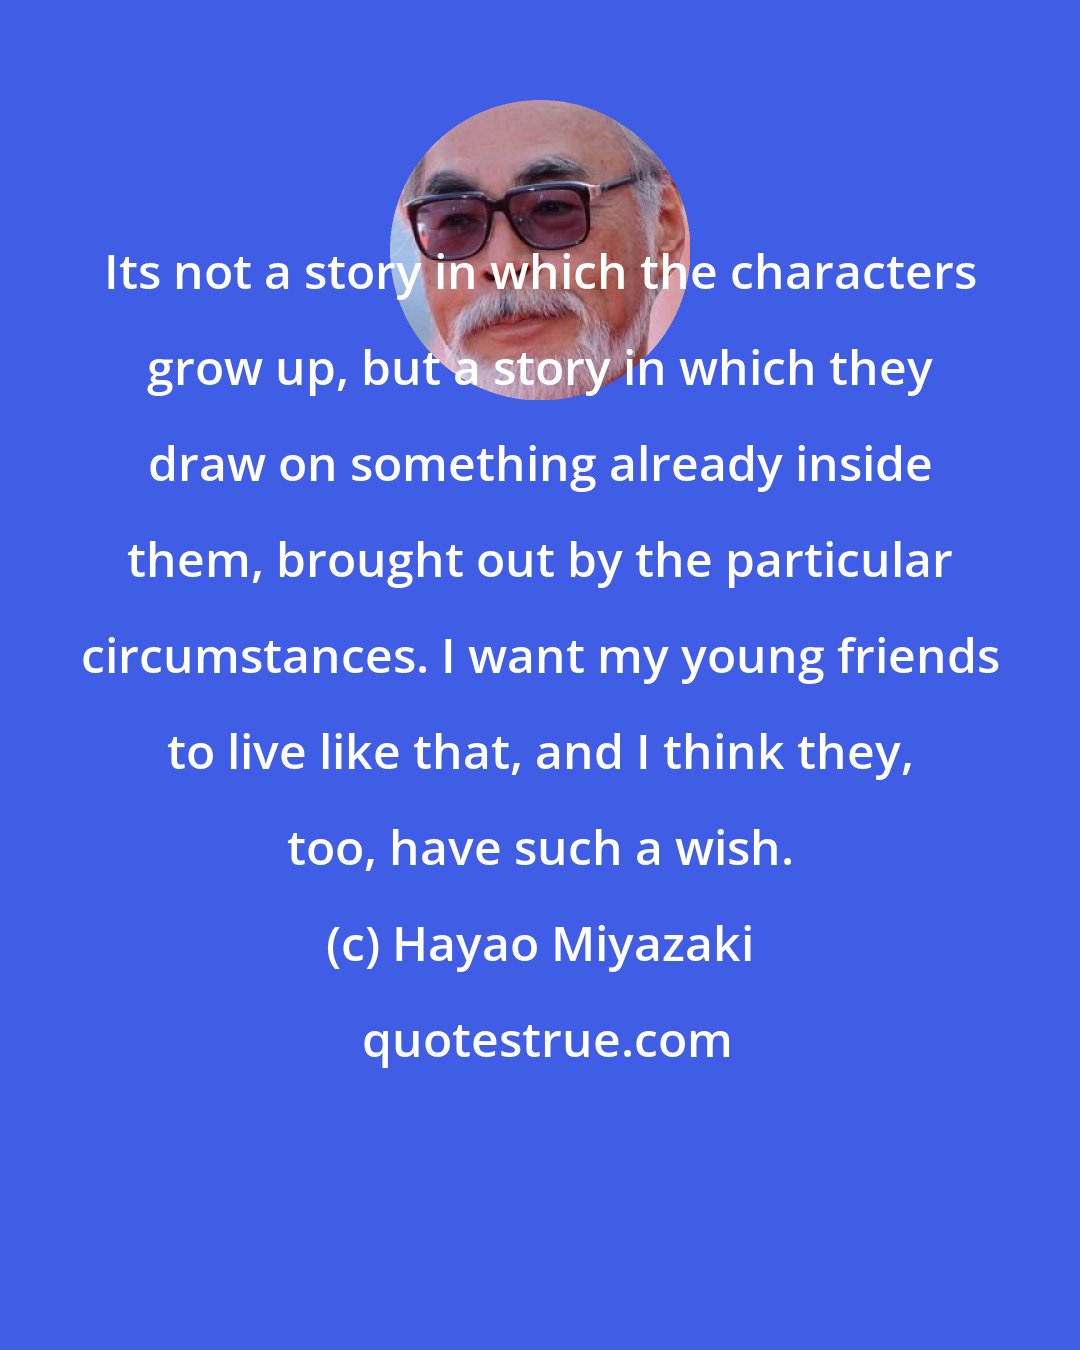 Hayao Miyazaki: Its not a story in which the characters grow up, but a story in which they draw on something already inside them, brought out by the particular circumstances. I want my young friends to live like that, and I think they, too, have such a wish.